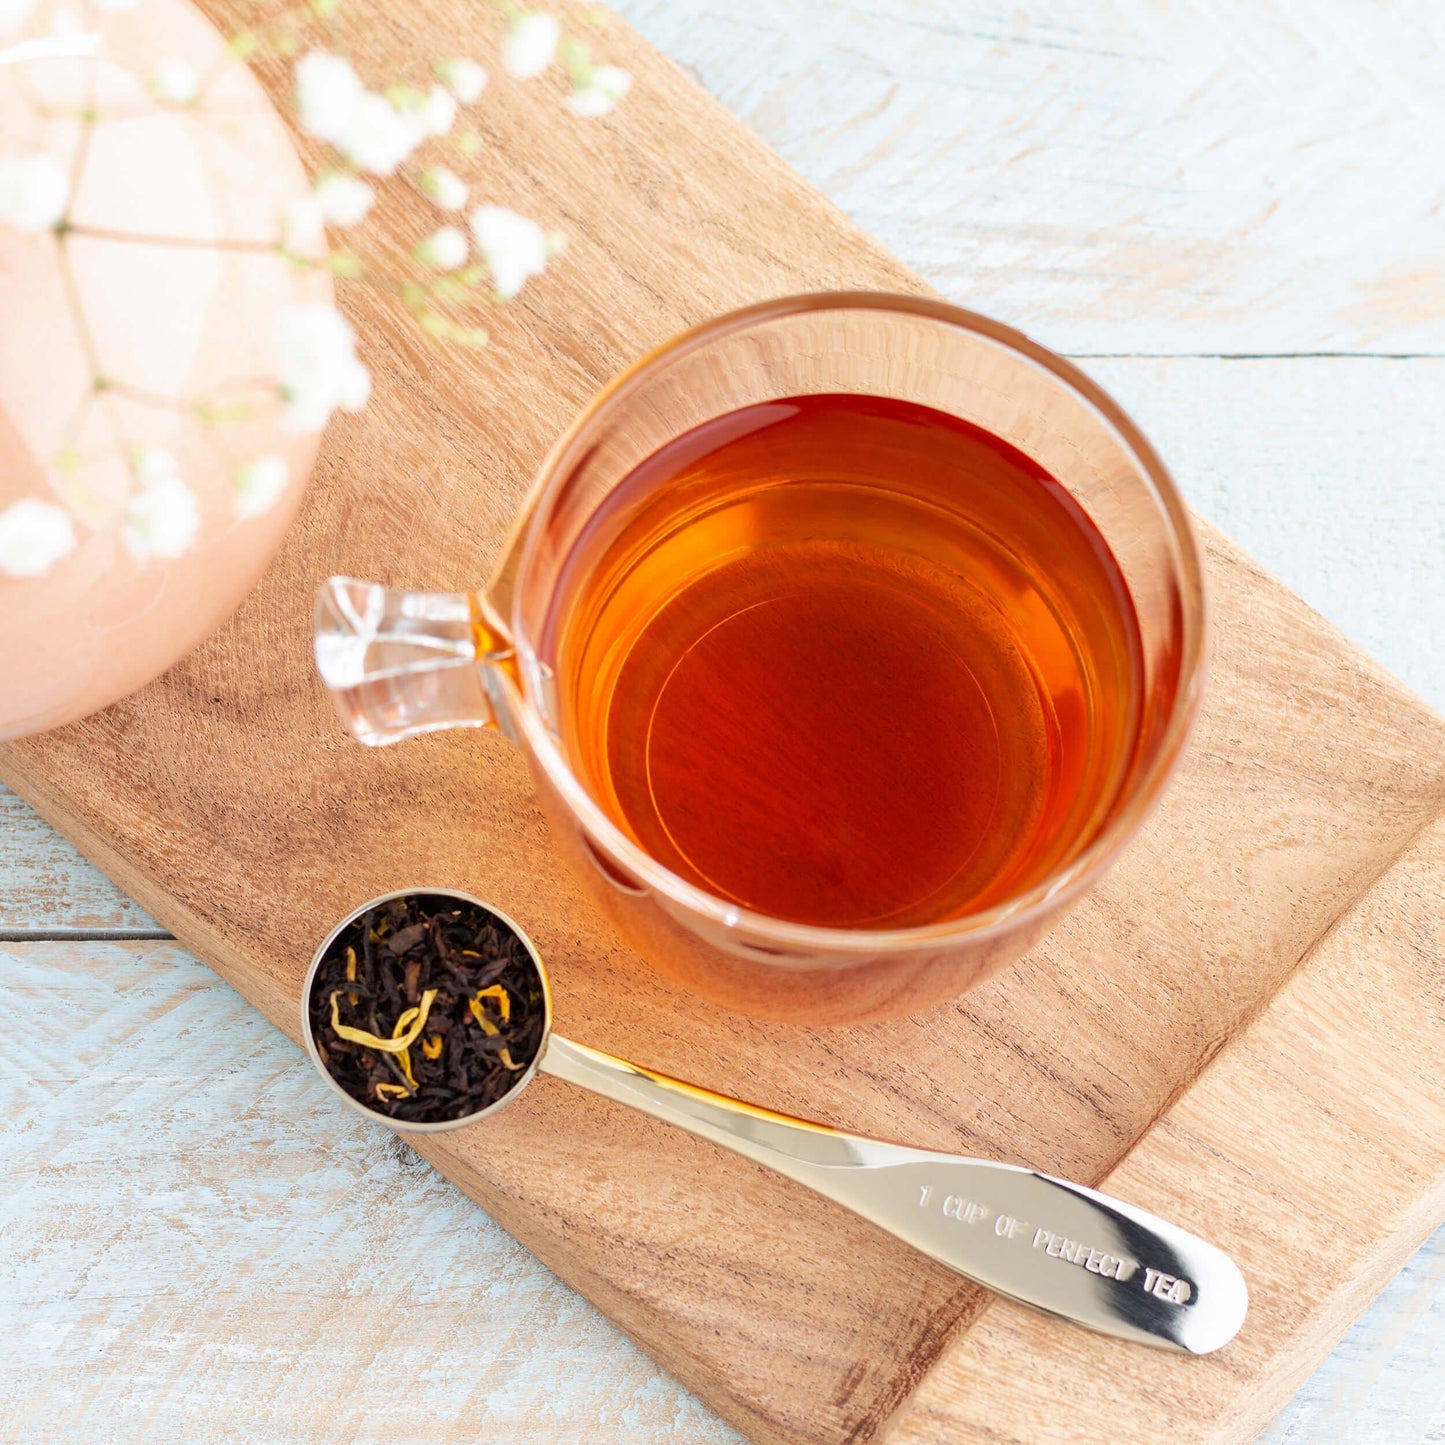 Apricot Brandy Organic Black Tea shown from above as brewed tea in a glass mug, displayed on a wooden board with a silver scoop of loose tea leaves in front